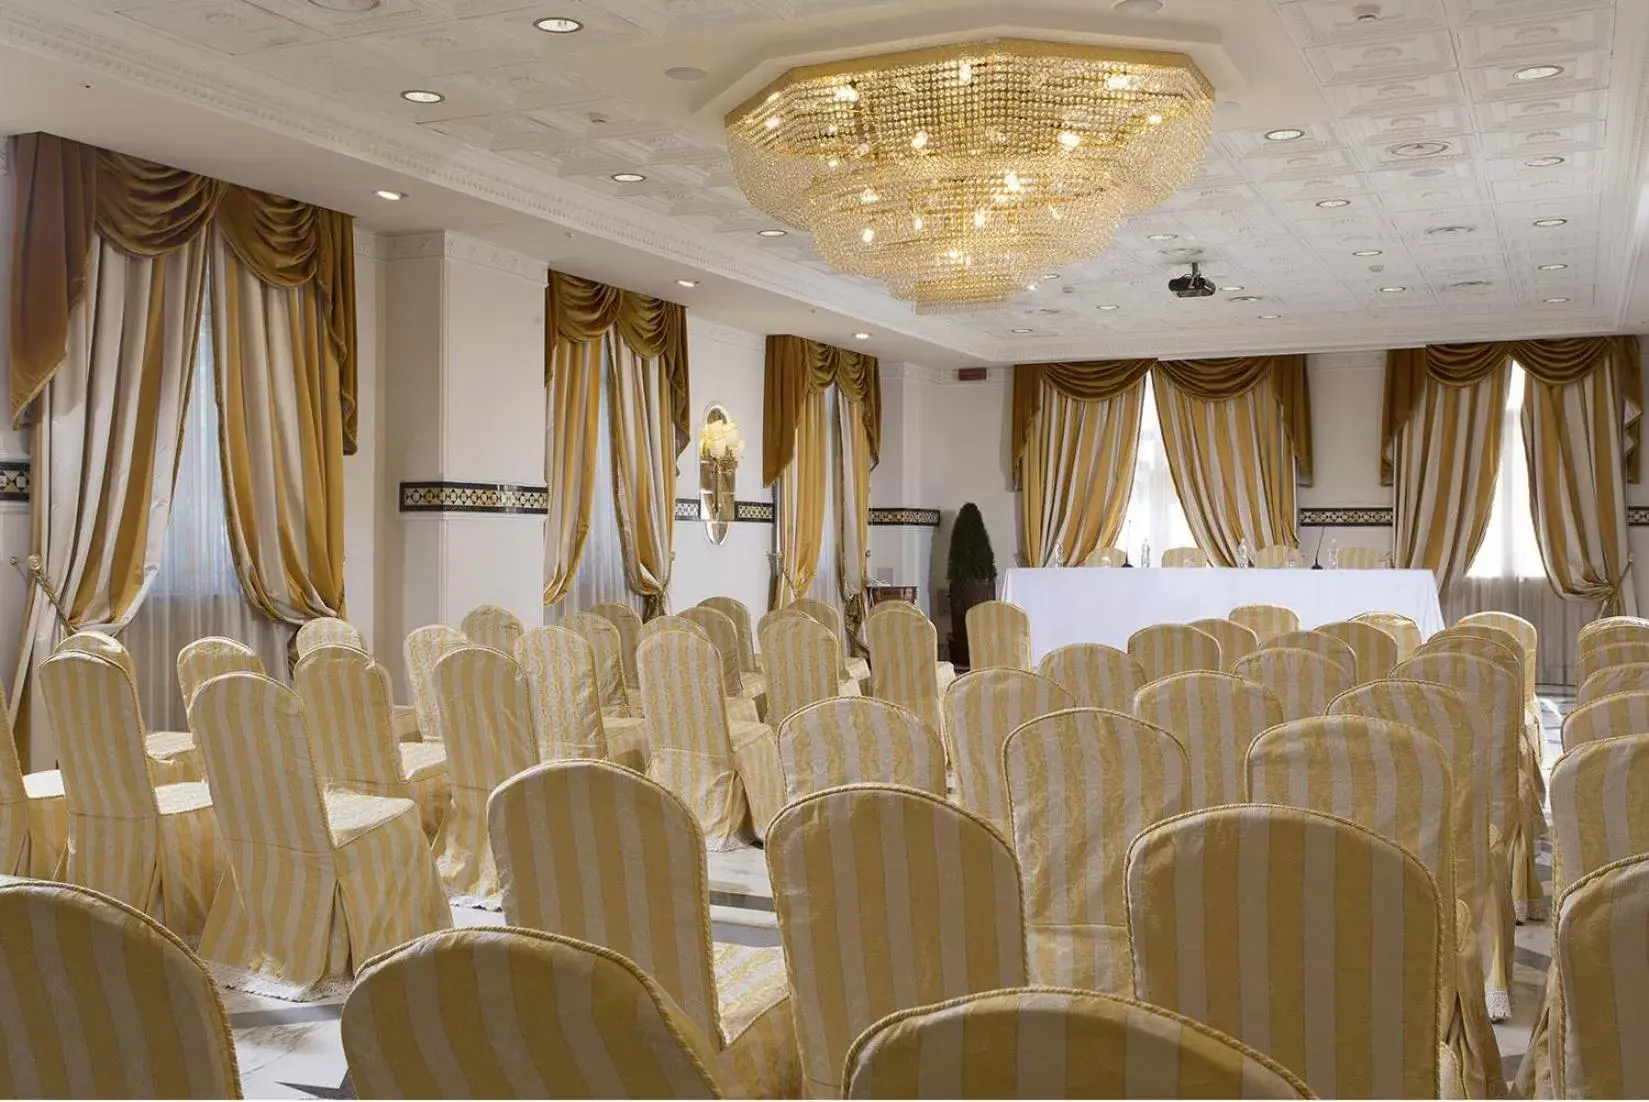 Meeting/conference room, Banquet Facilities in Grand Hotel Vanvitelli